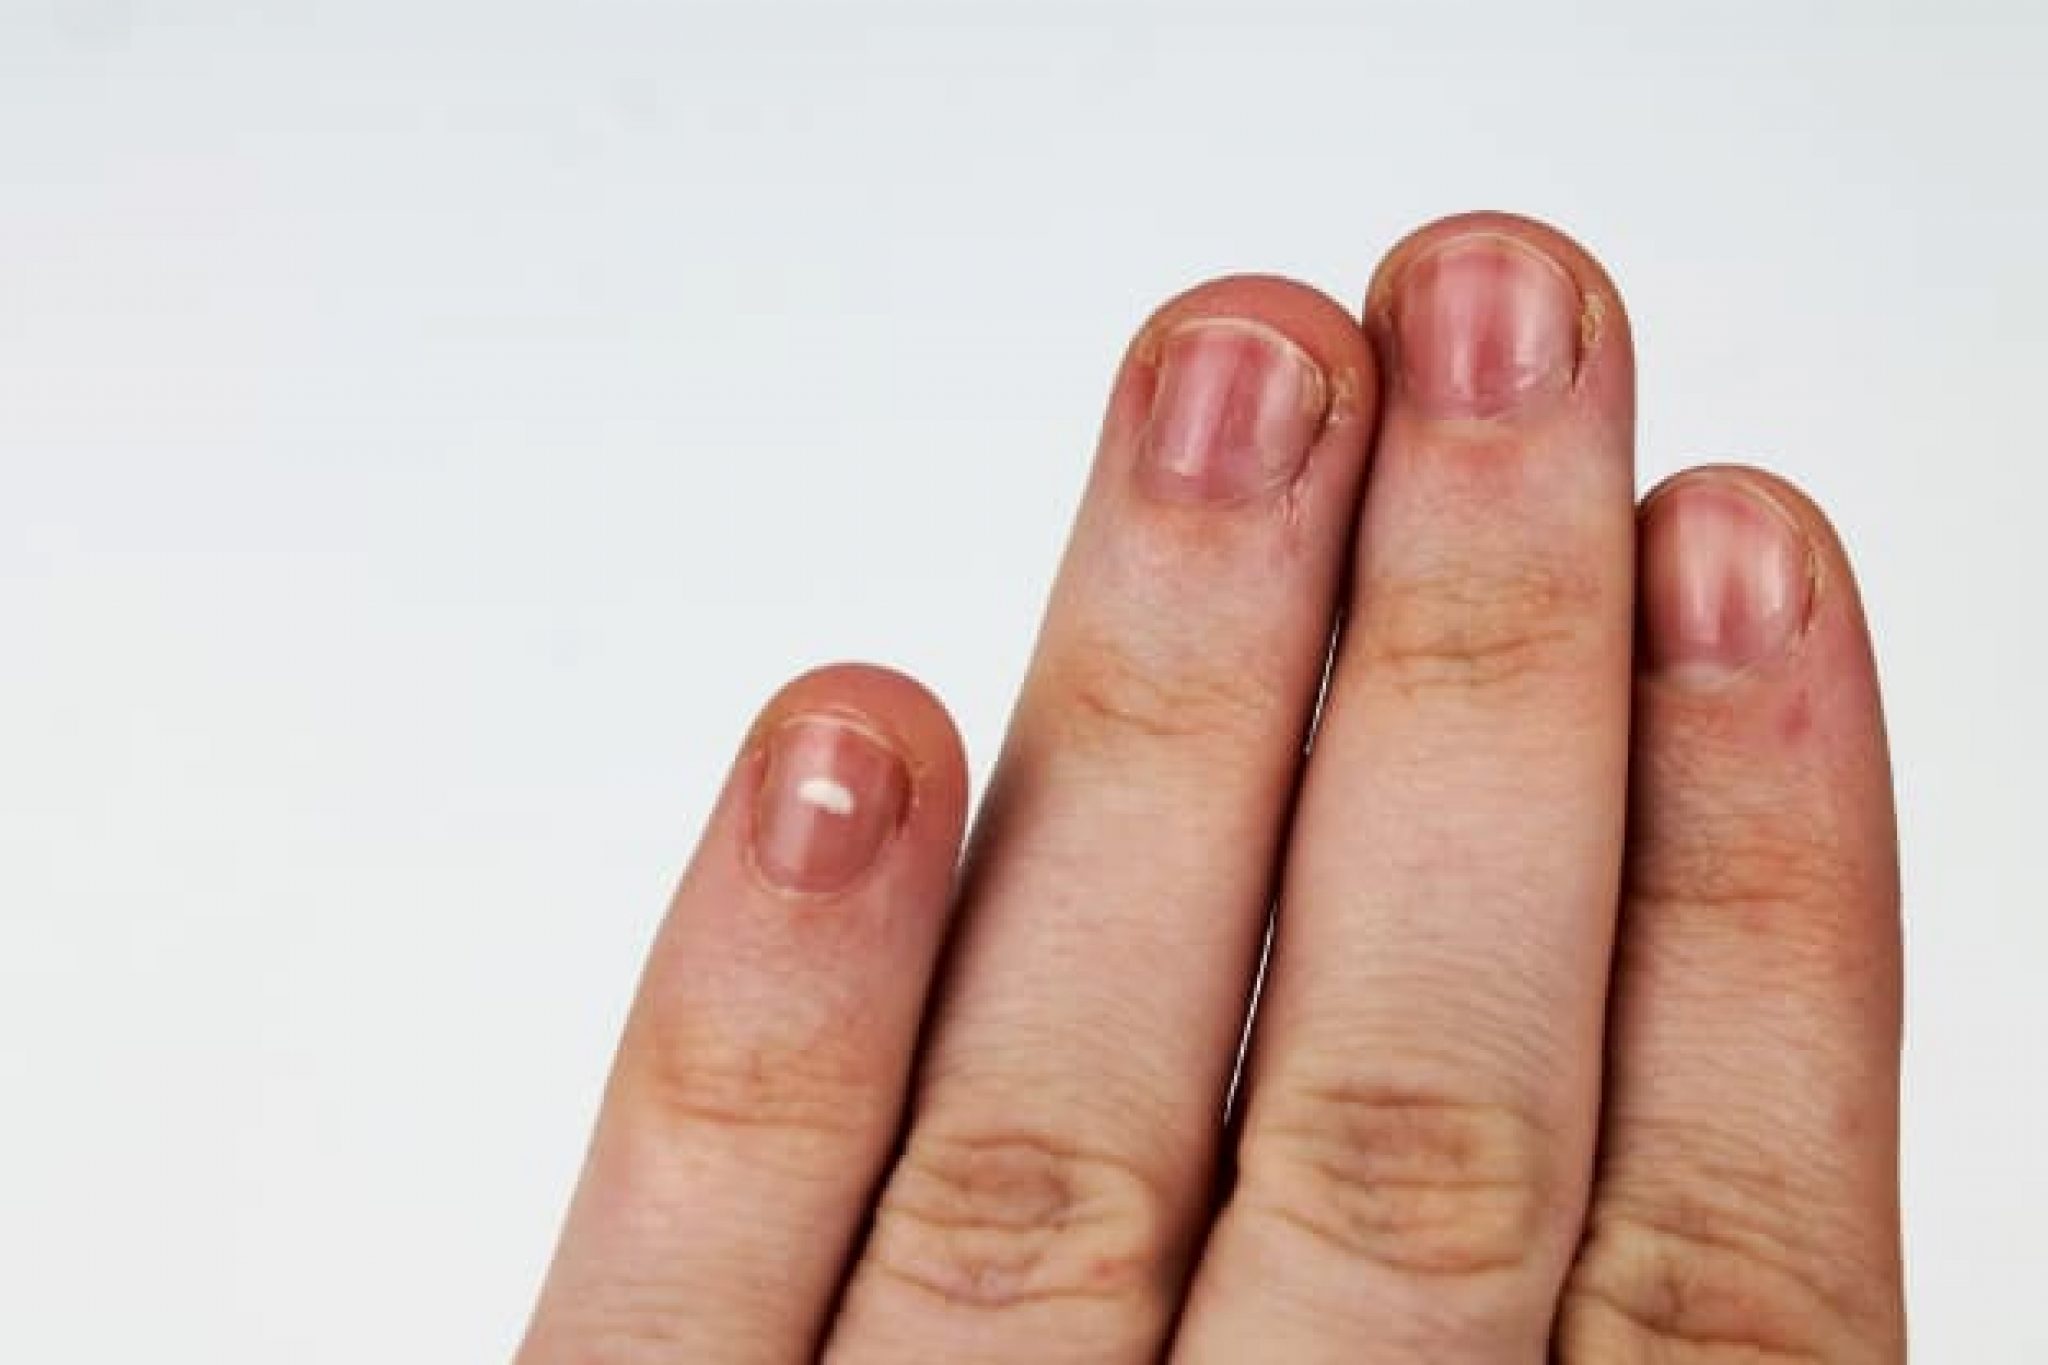 What Does It Mean When Your Ring Finger Nail Color Is Different? - wide 4